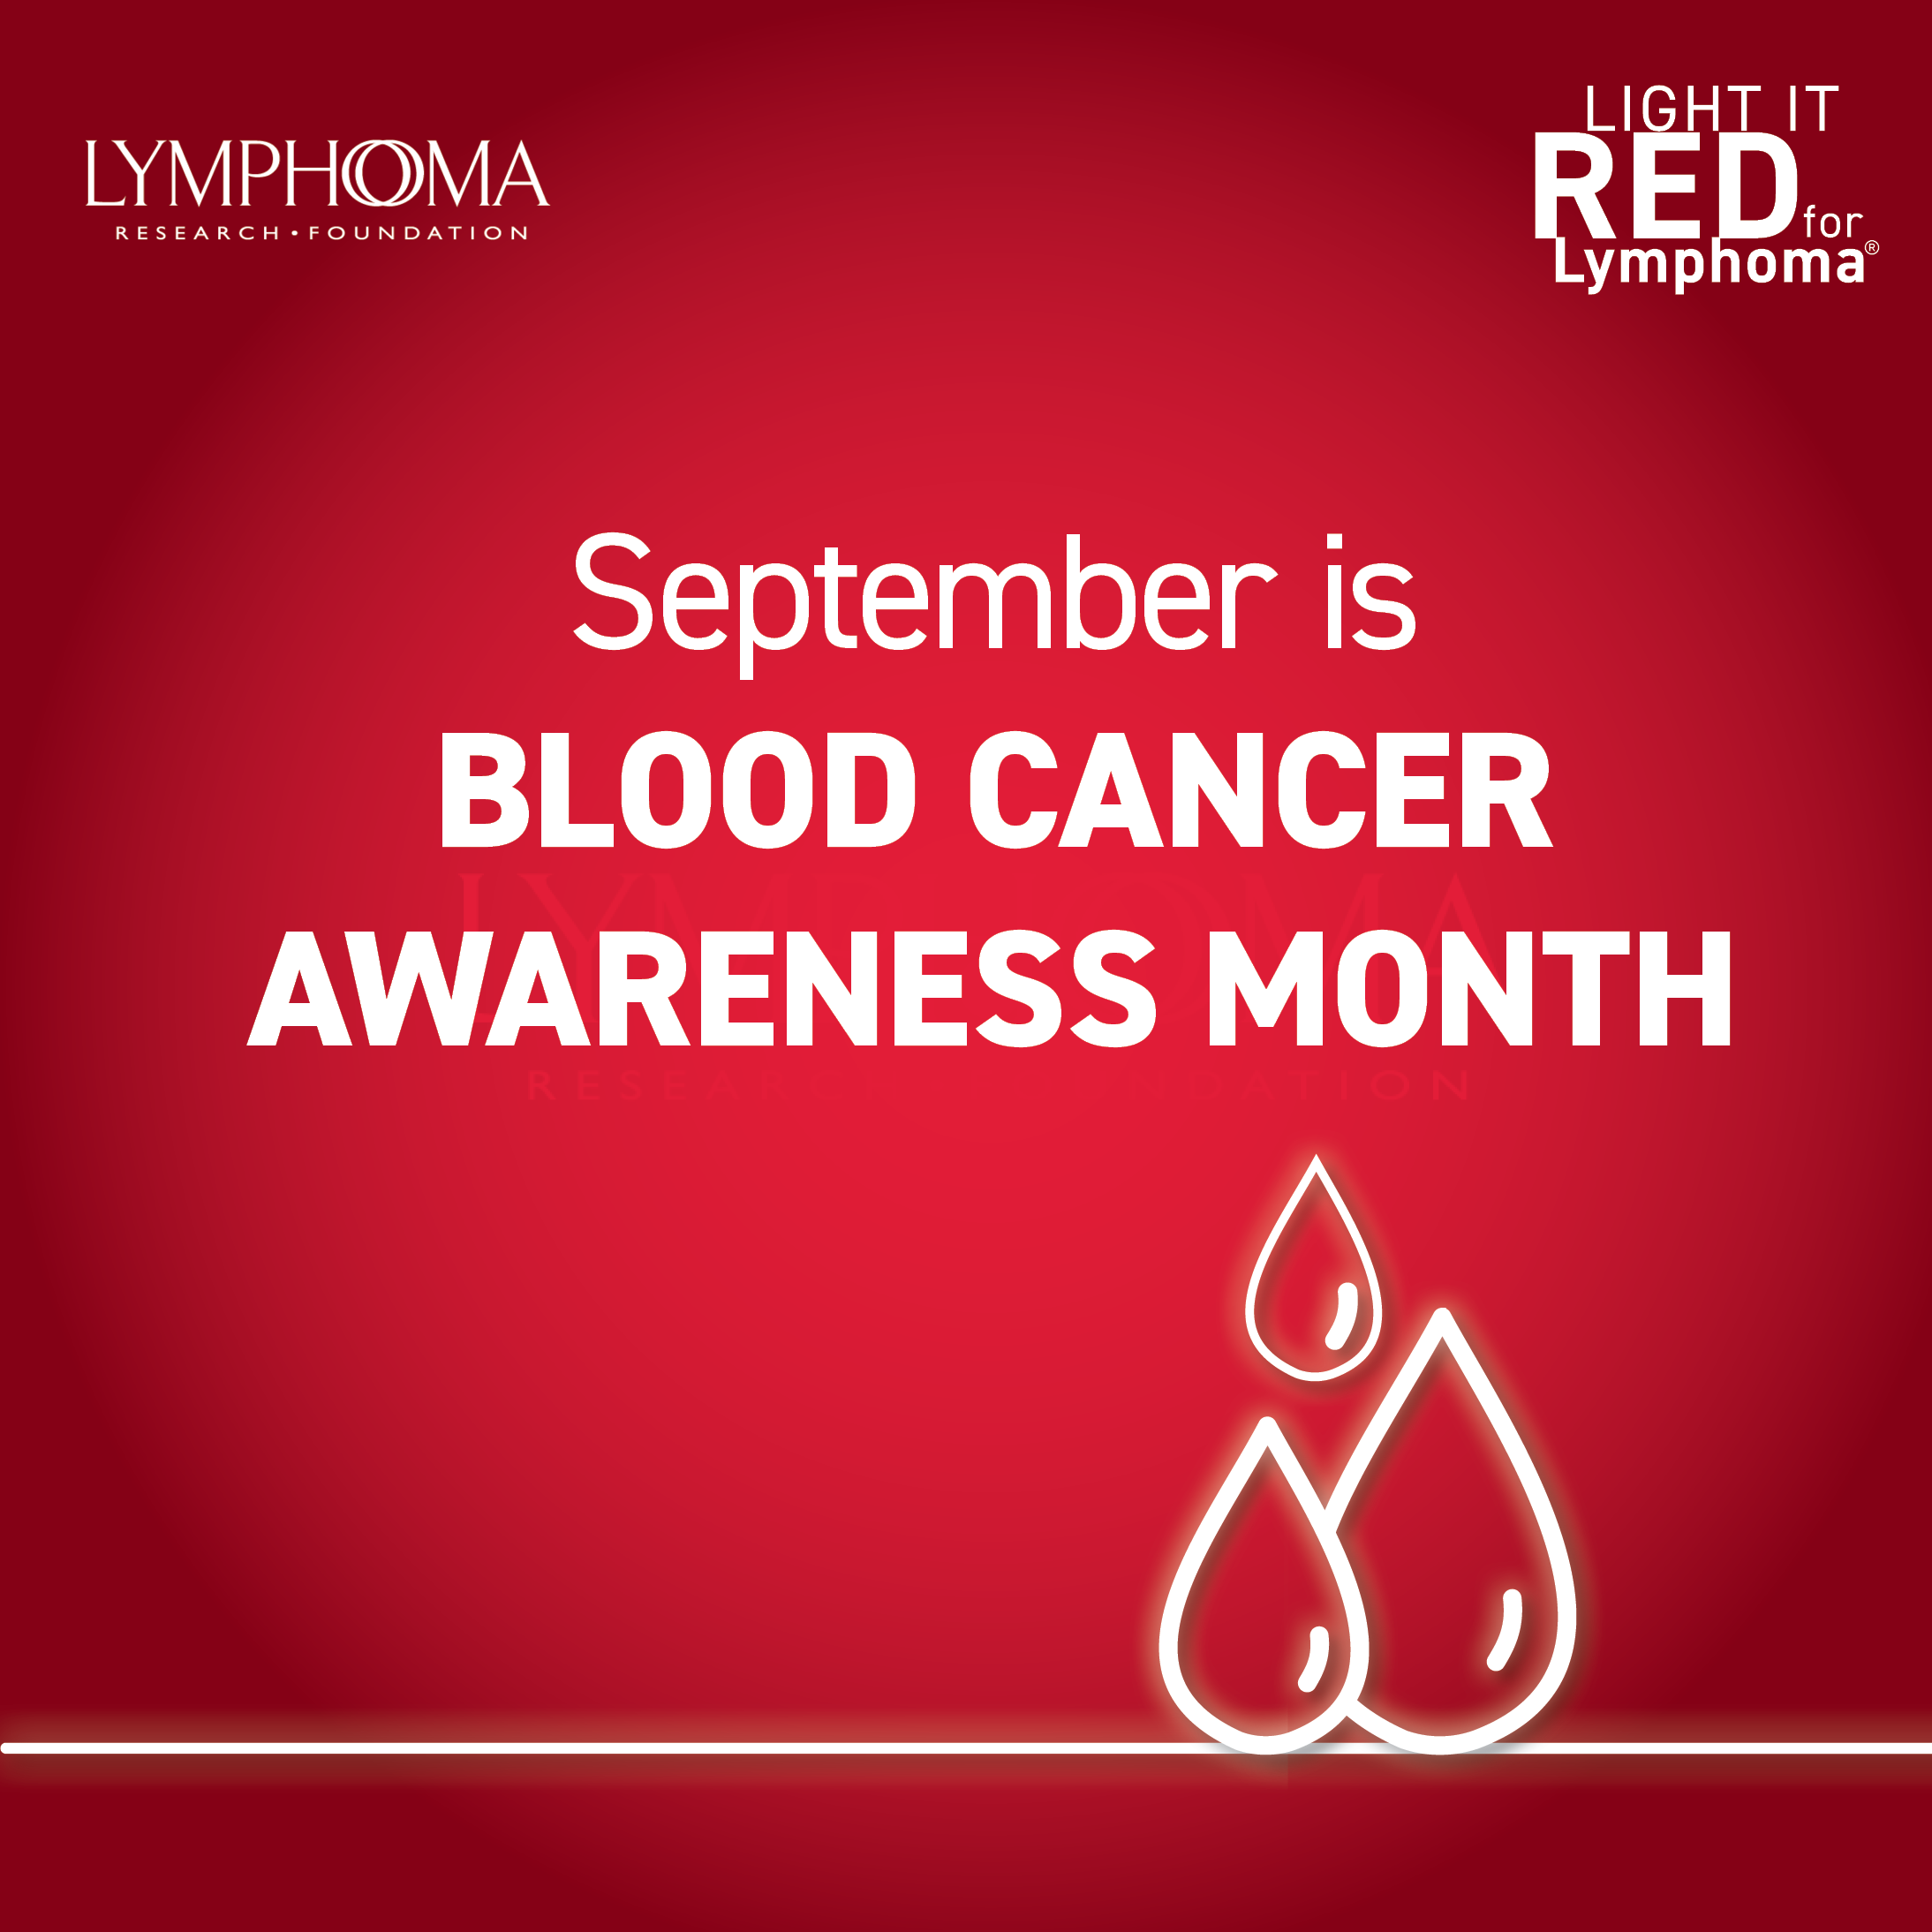 Light it Red for | Research Foundation